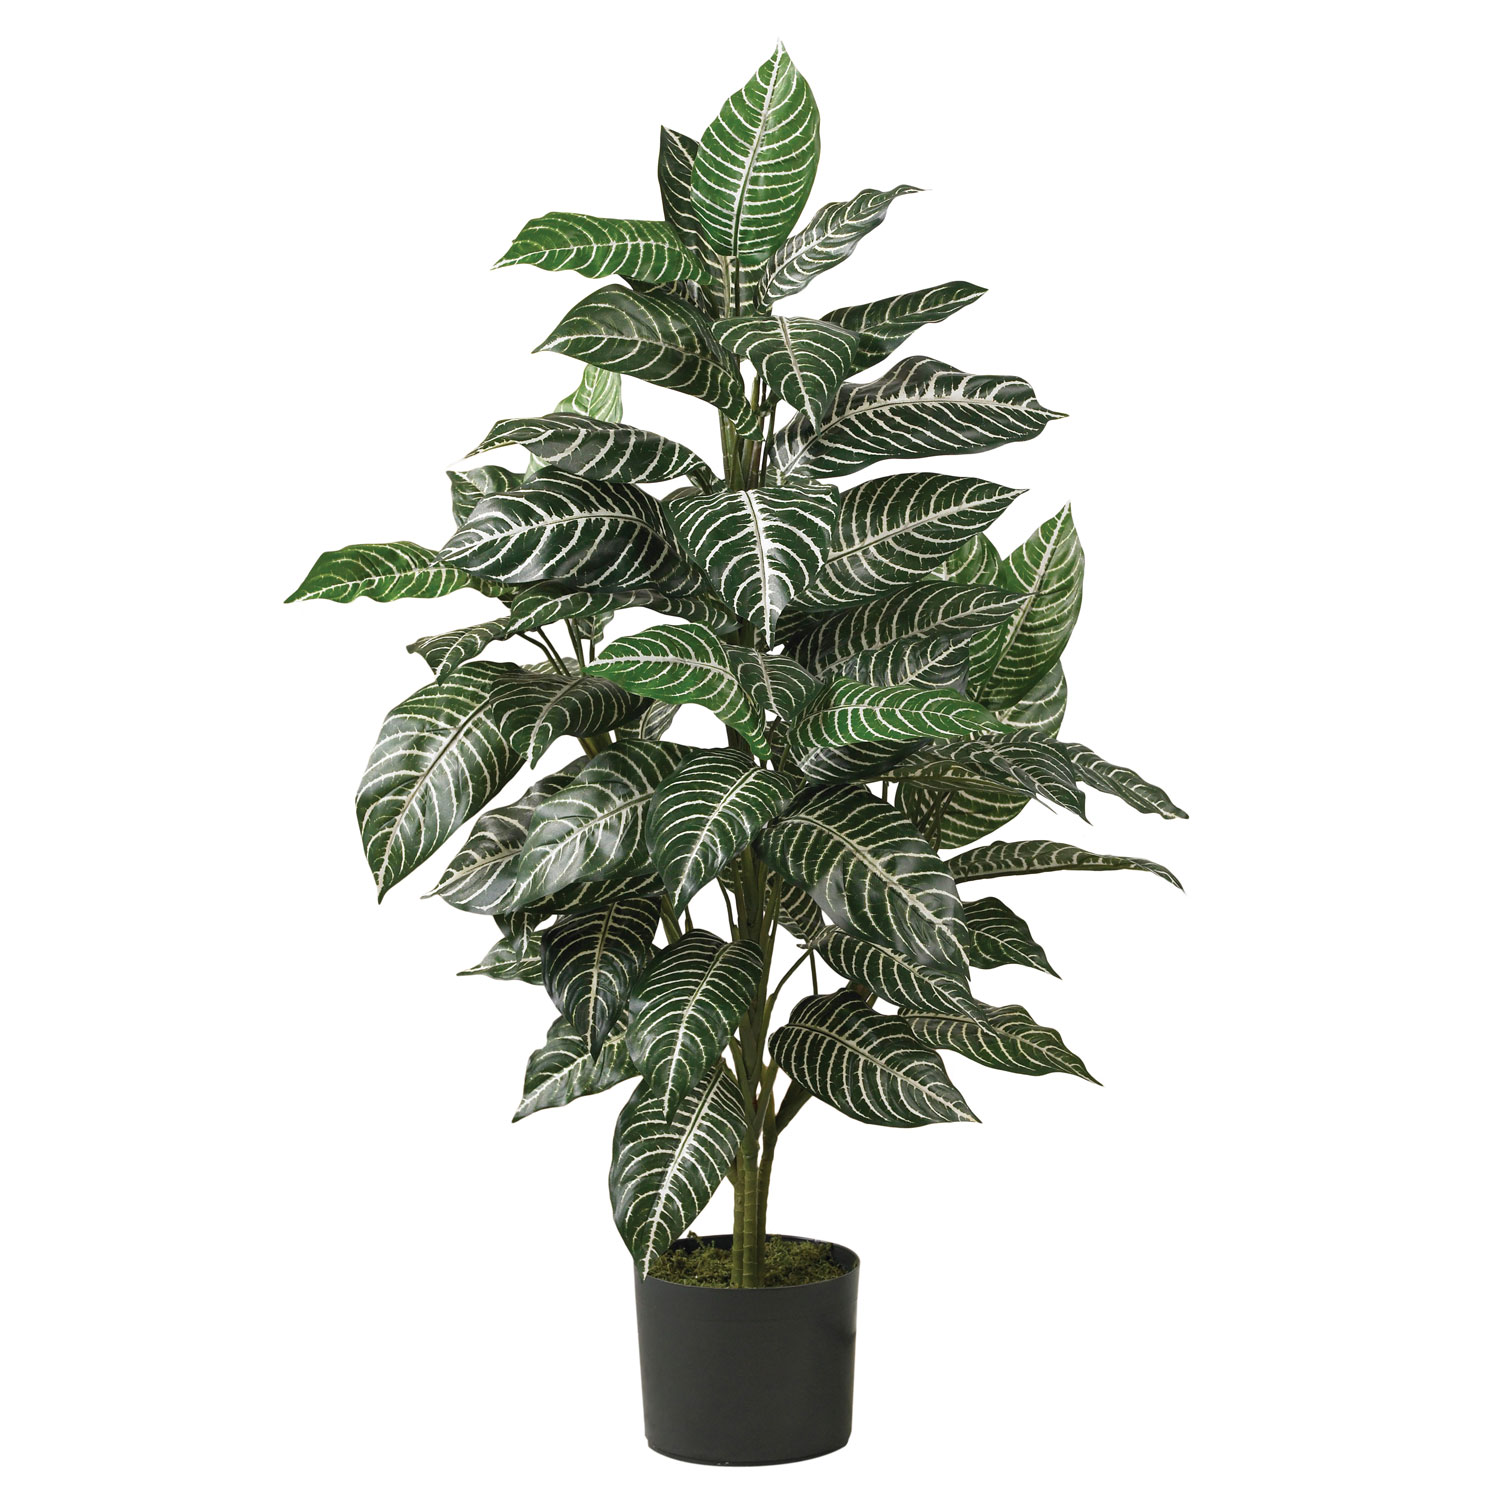 3 Foot Zebra Plant: Potted